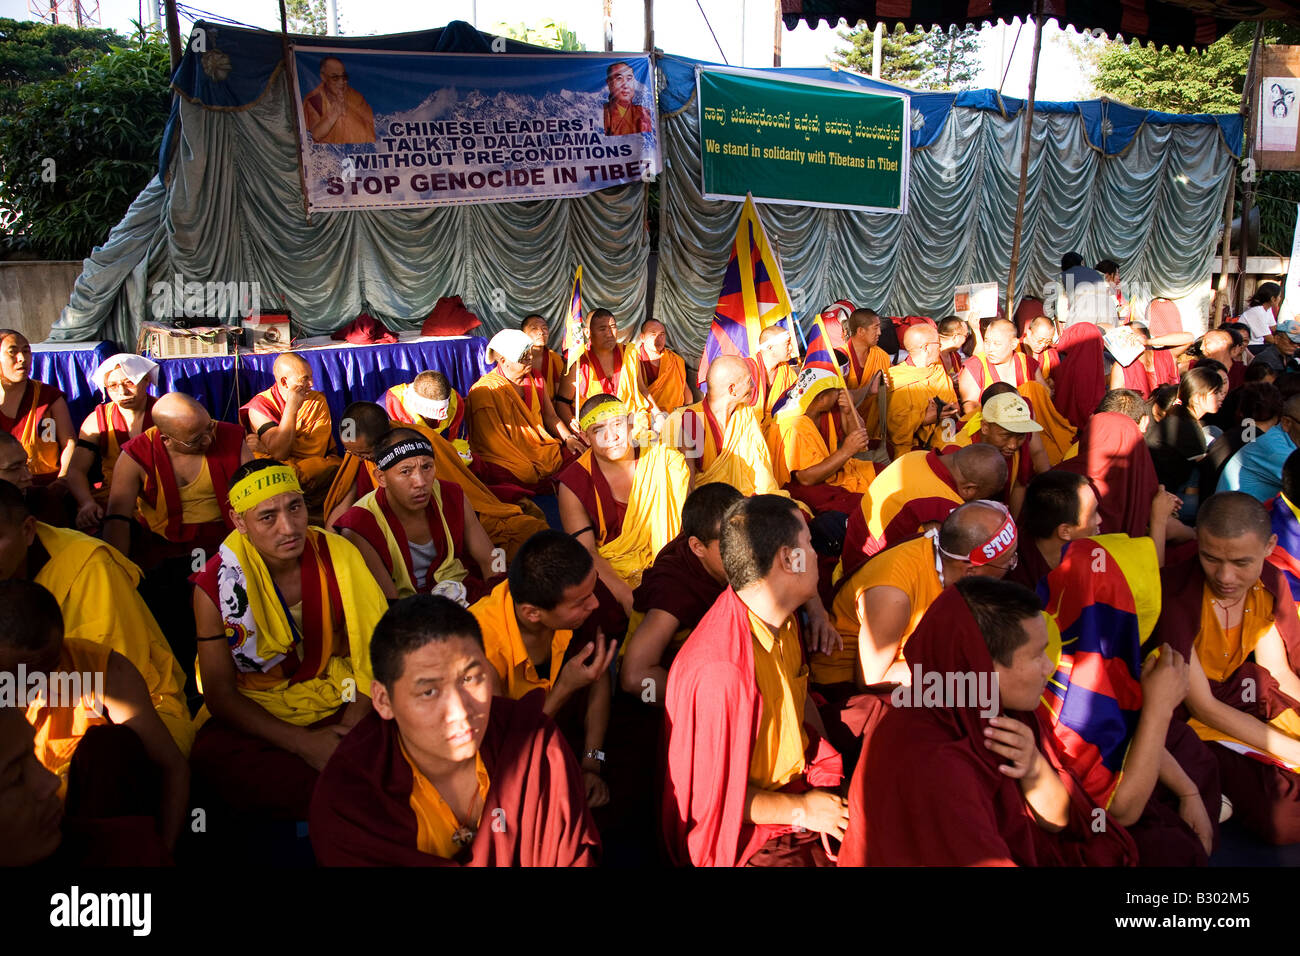 Tibetan exiles and people of Tibetan origin protest under the shade of an awning in Bangalore. Stock Photo